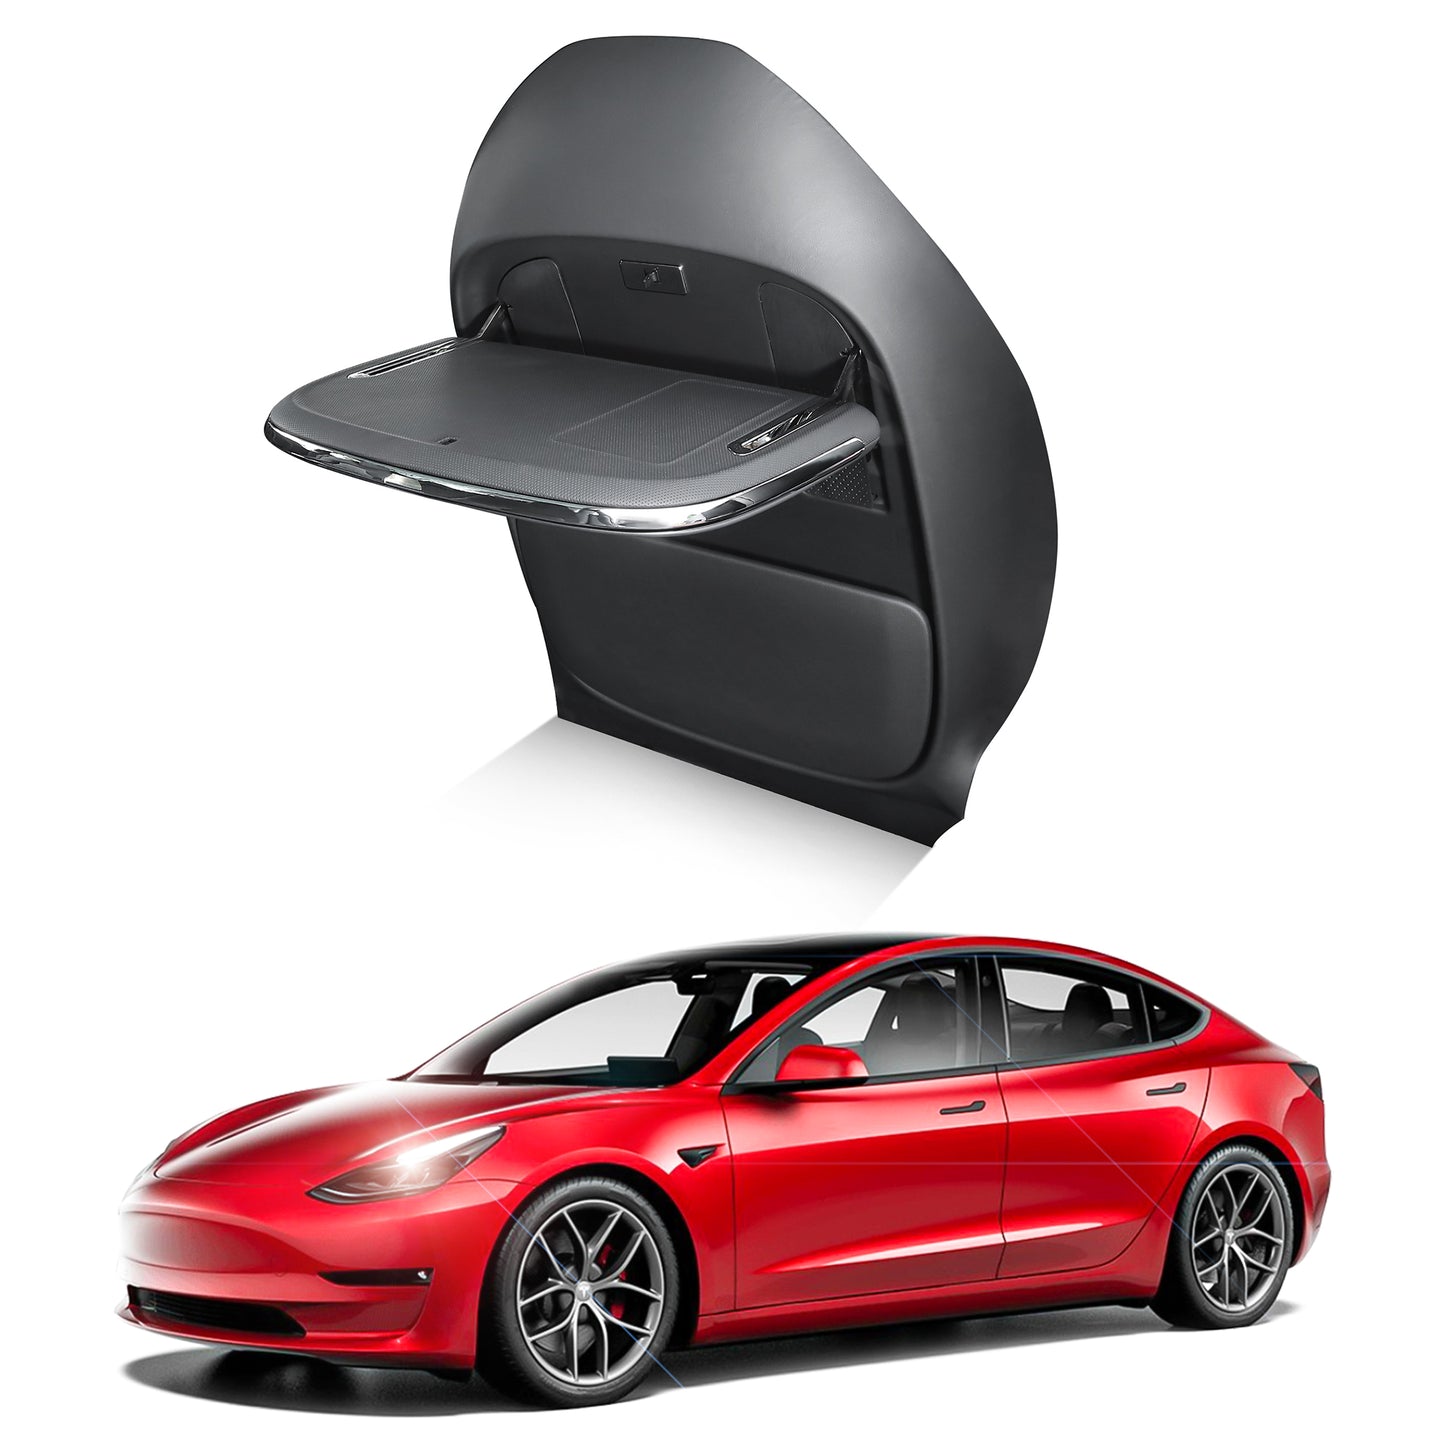 tesla model 3 Y car 2022 2023 2021 2020 2019 2018 s3xy Accessories Car Folding Seat Back Table Wireless Charging arcoche accessories accessory aftermarket price Vehicles standard long range performance sr+ electric car rwd ev interior exterior diy decoration price elon musk must have black white red blue 5 7 seats seat